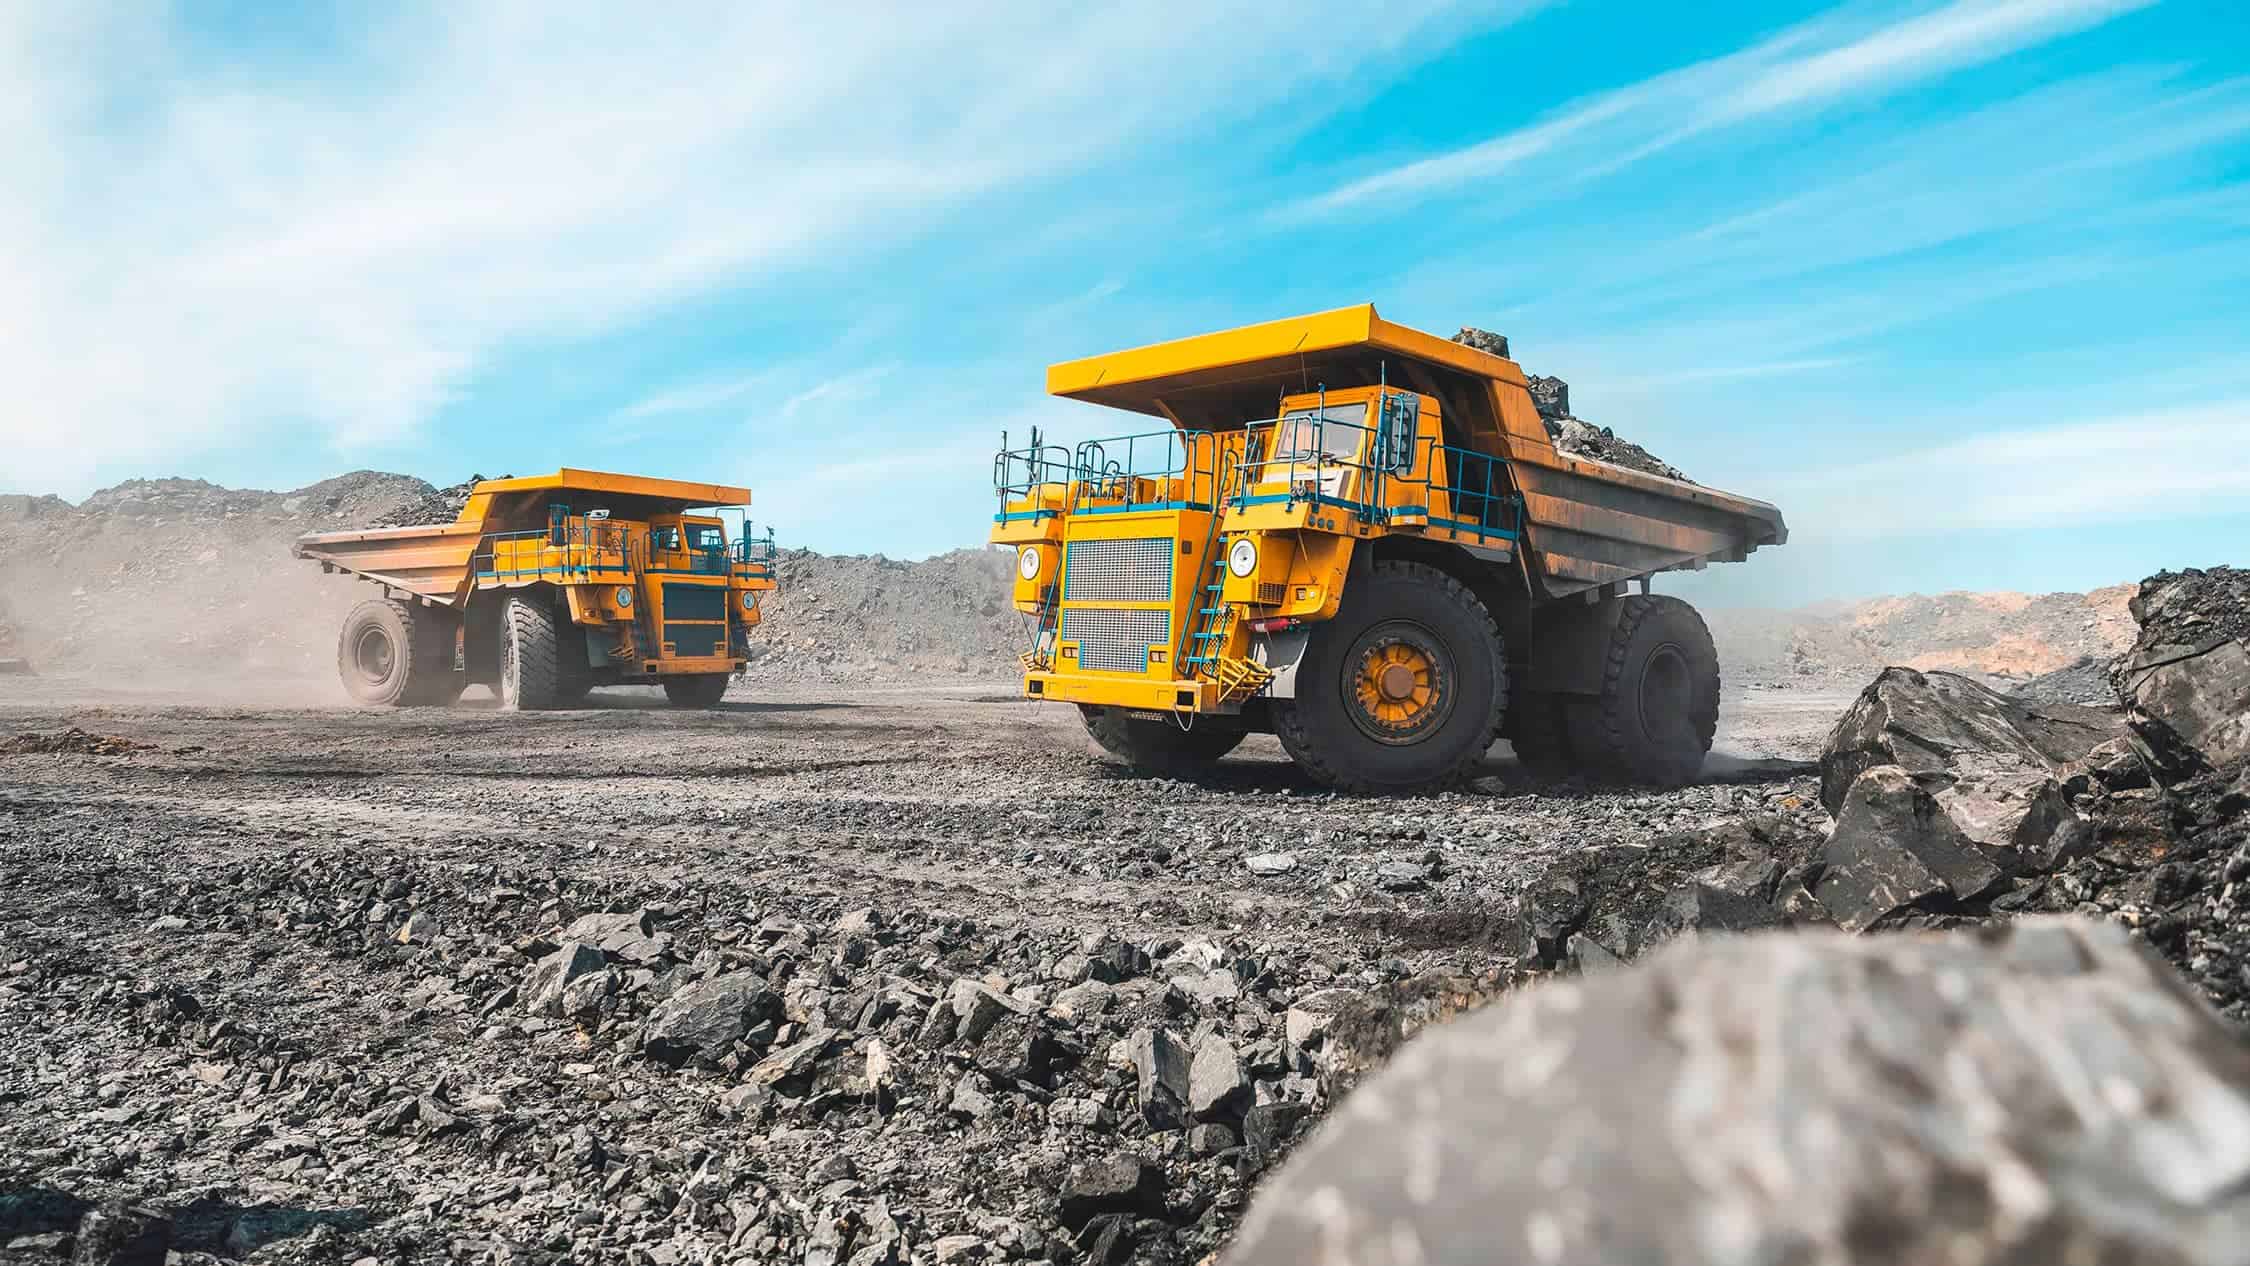 Mining vehicles and equipment working the land